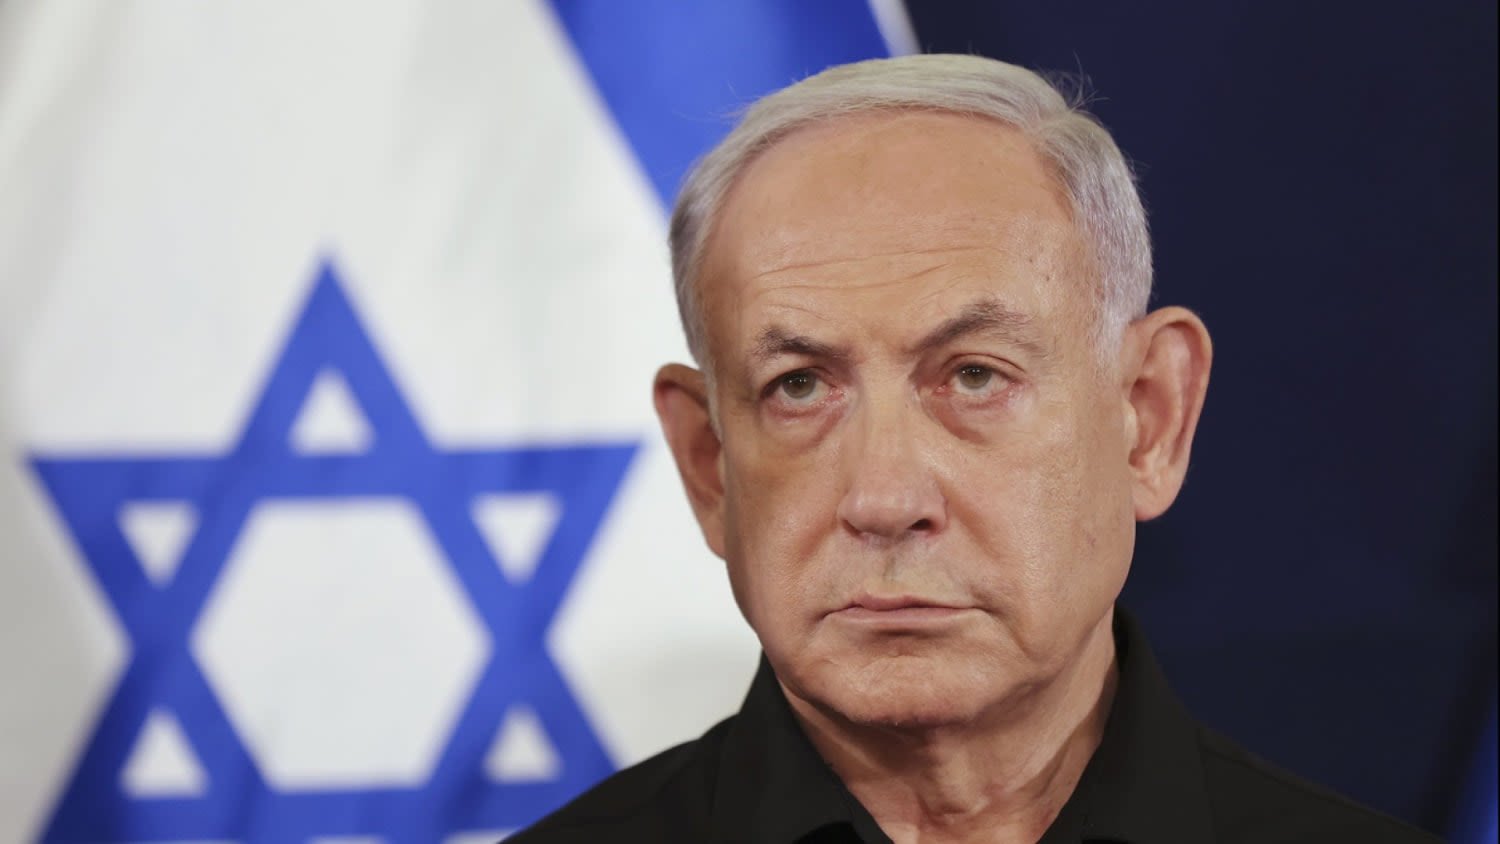 Israeli PM Netanyahu does not accept Hamas's request for a permanent cease-fire